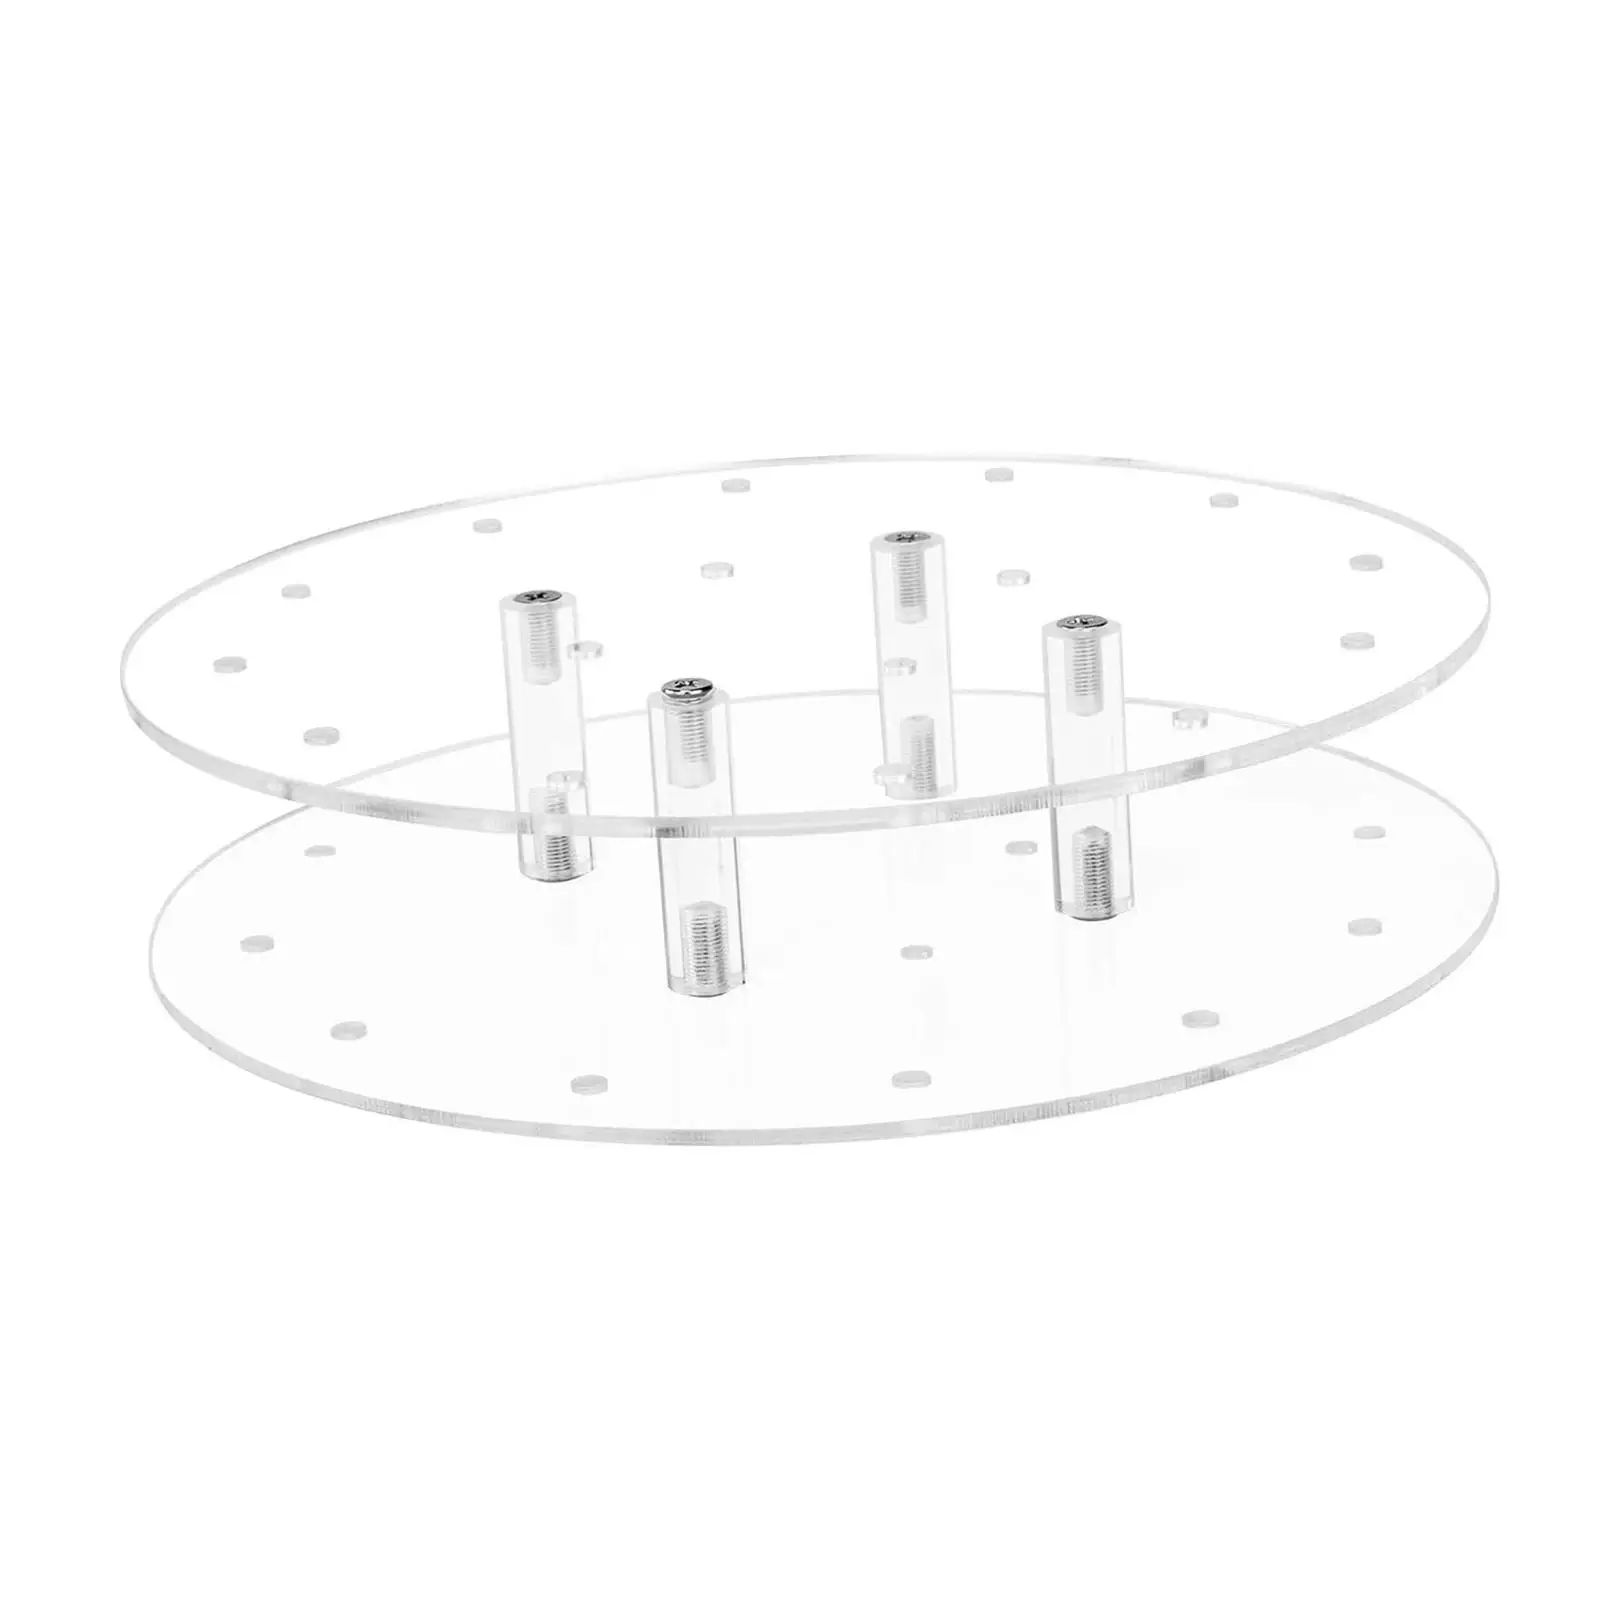 Clear Acrylic Cake Display Stand 2 Tiered Cake Holder Dessert Stands for Anniversary Thanksgiving Christmas Halloween Decoration